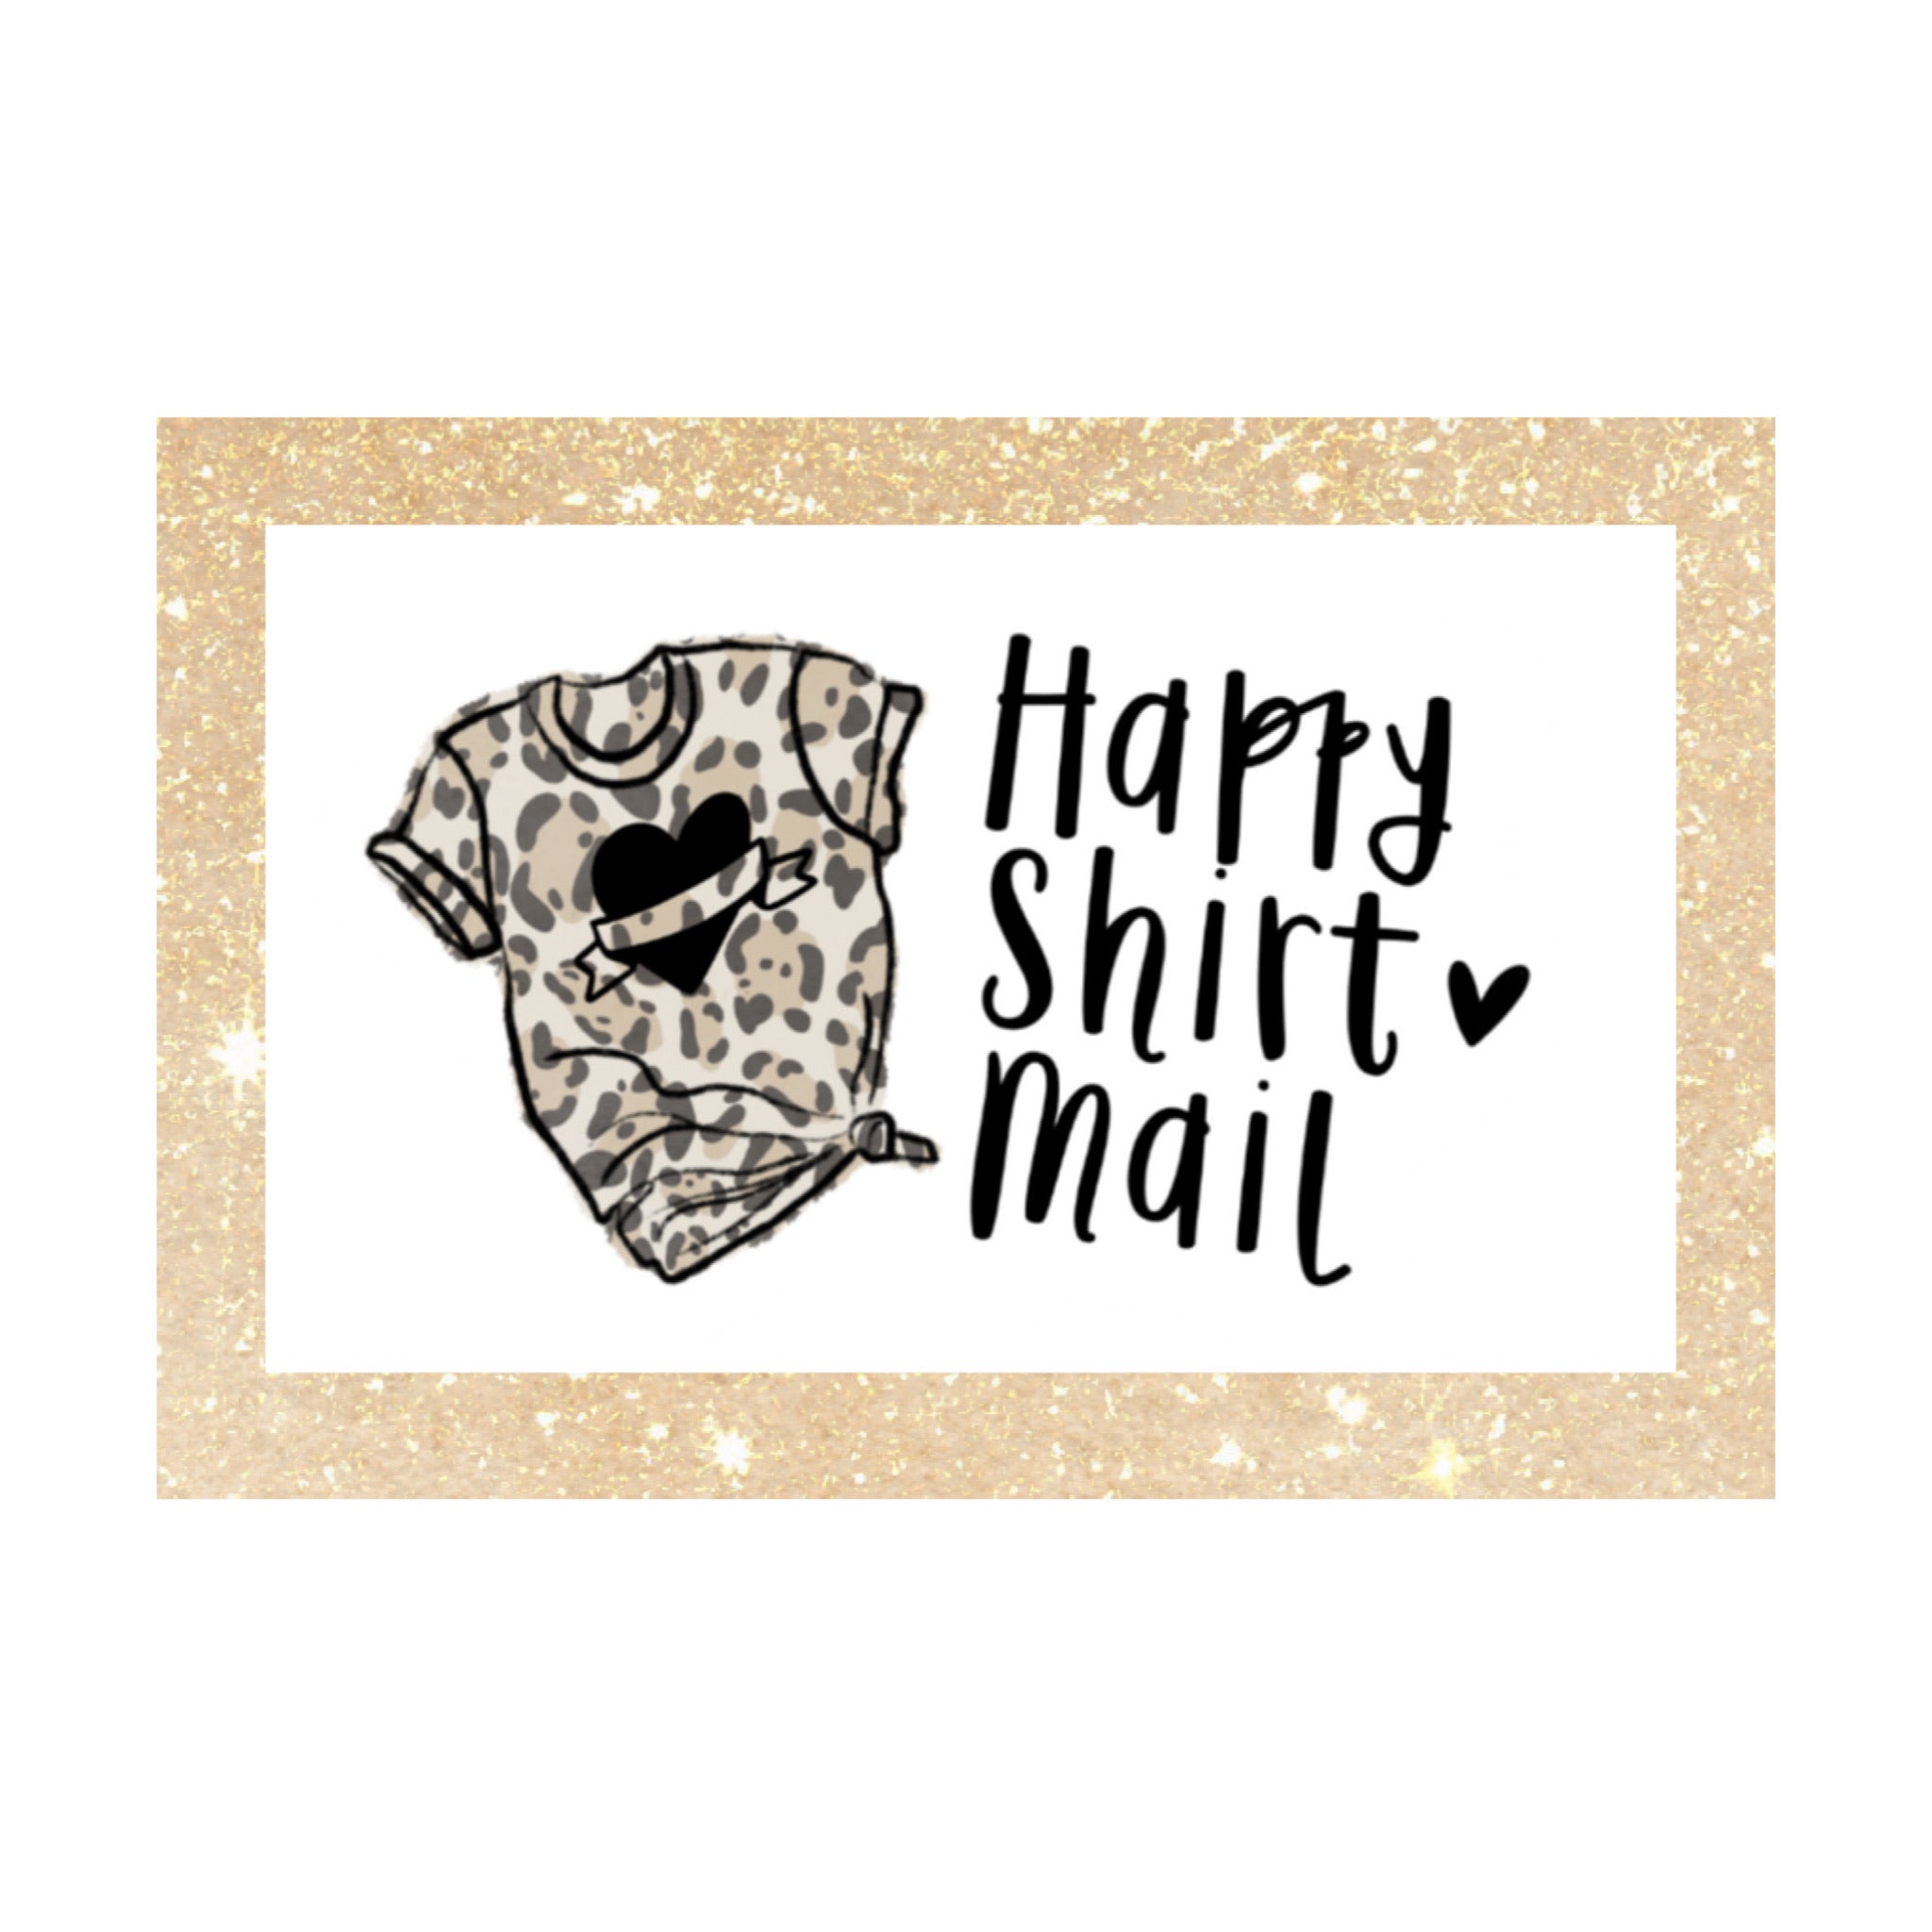 TGD Exclusive! Leopard and Black Happy Shirt Mail Sticker 1.5x2.5 Square Stickers, 25 stickers per pack